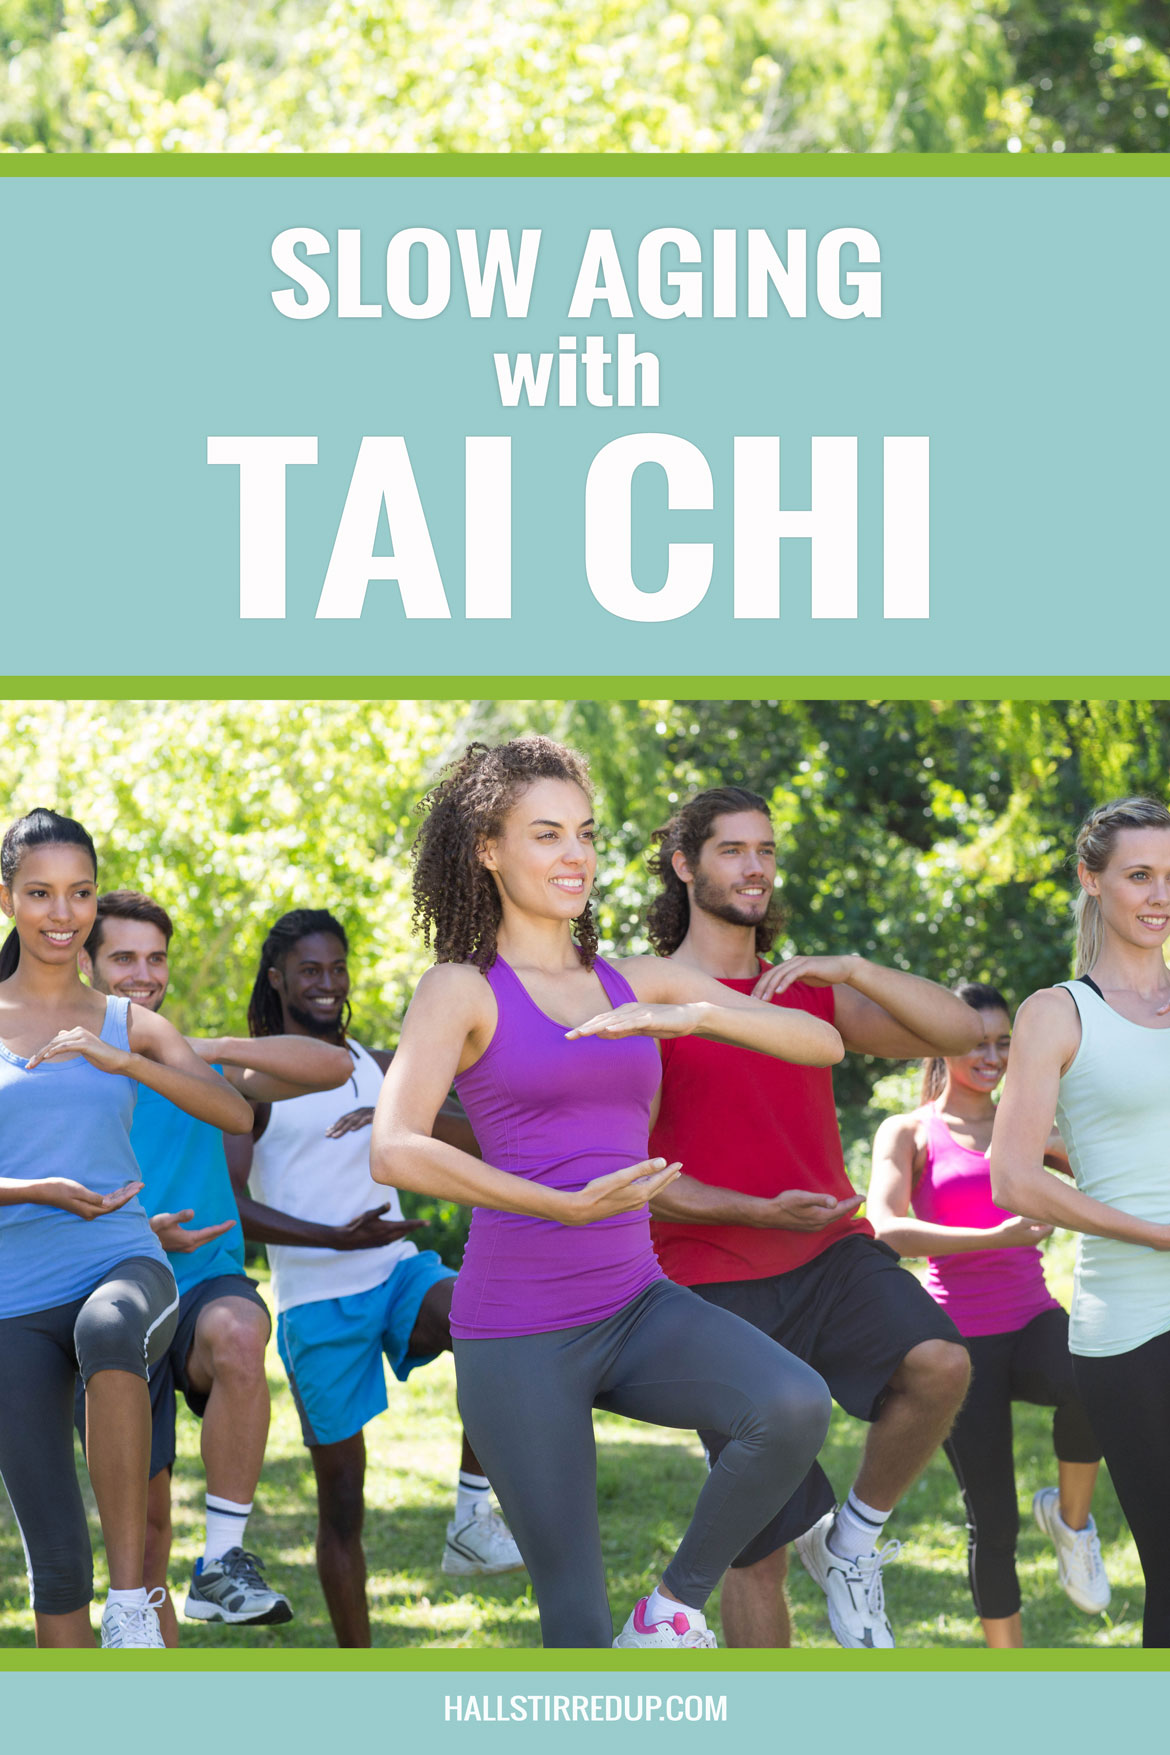 Slow aging with Tai Chi